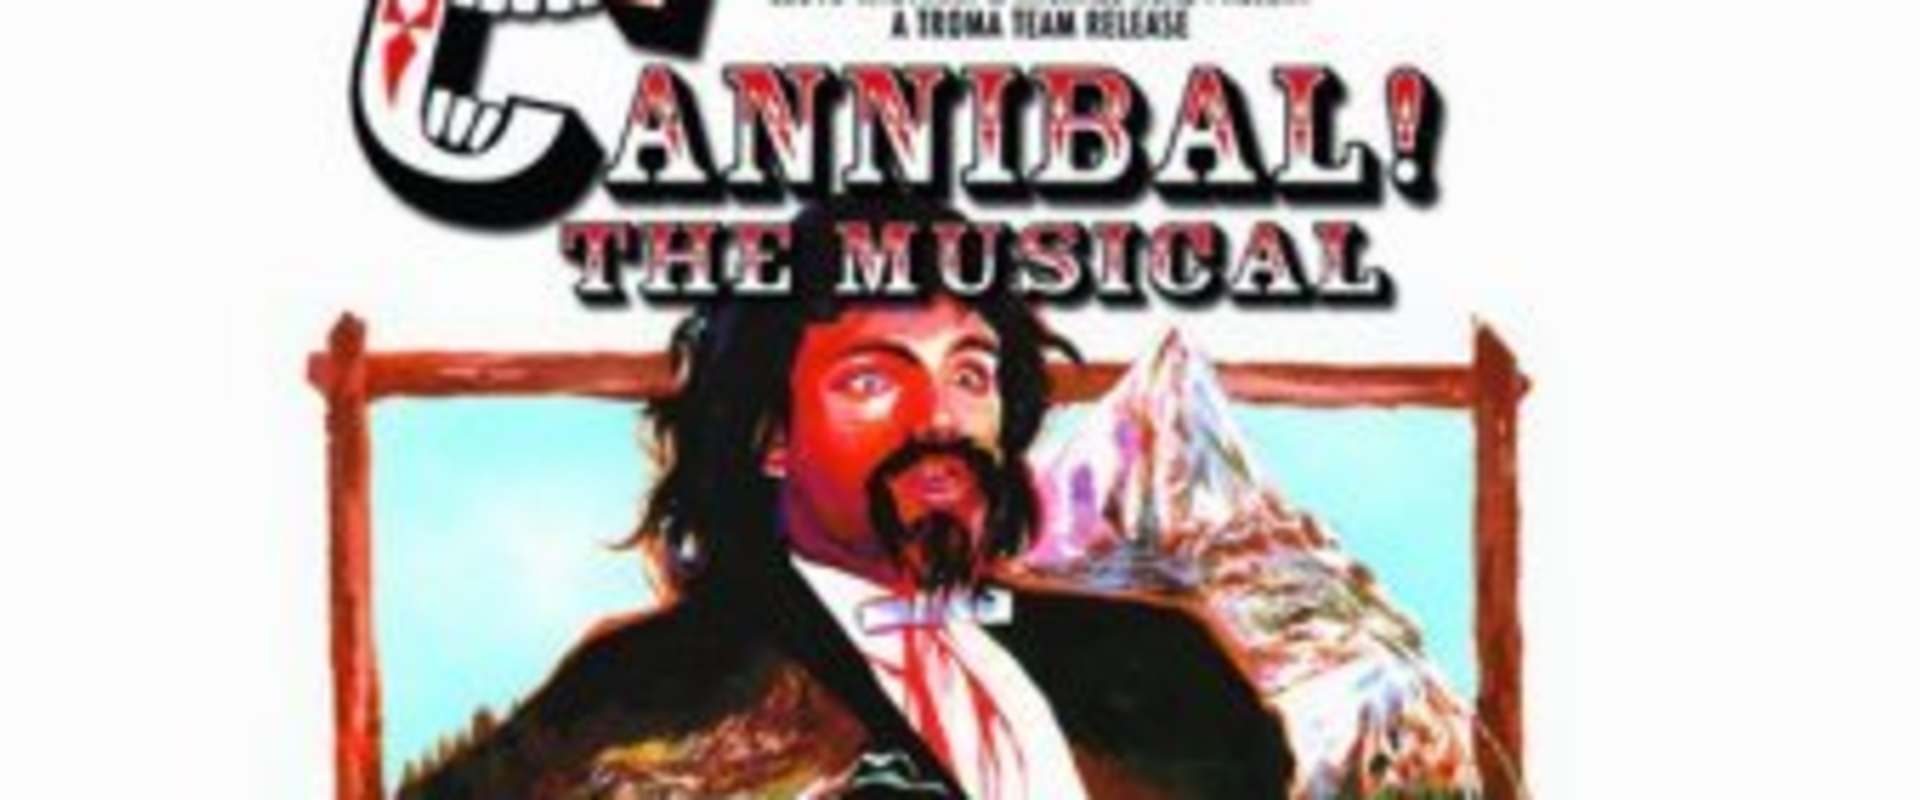 Cannibal! The Musical background 1